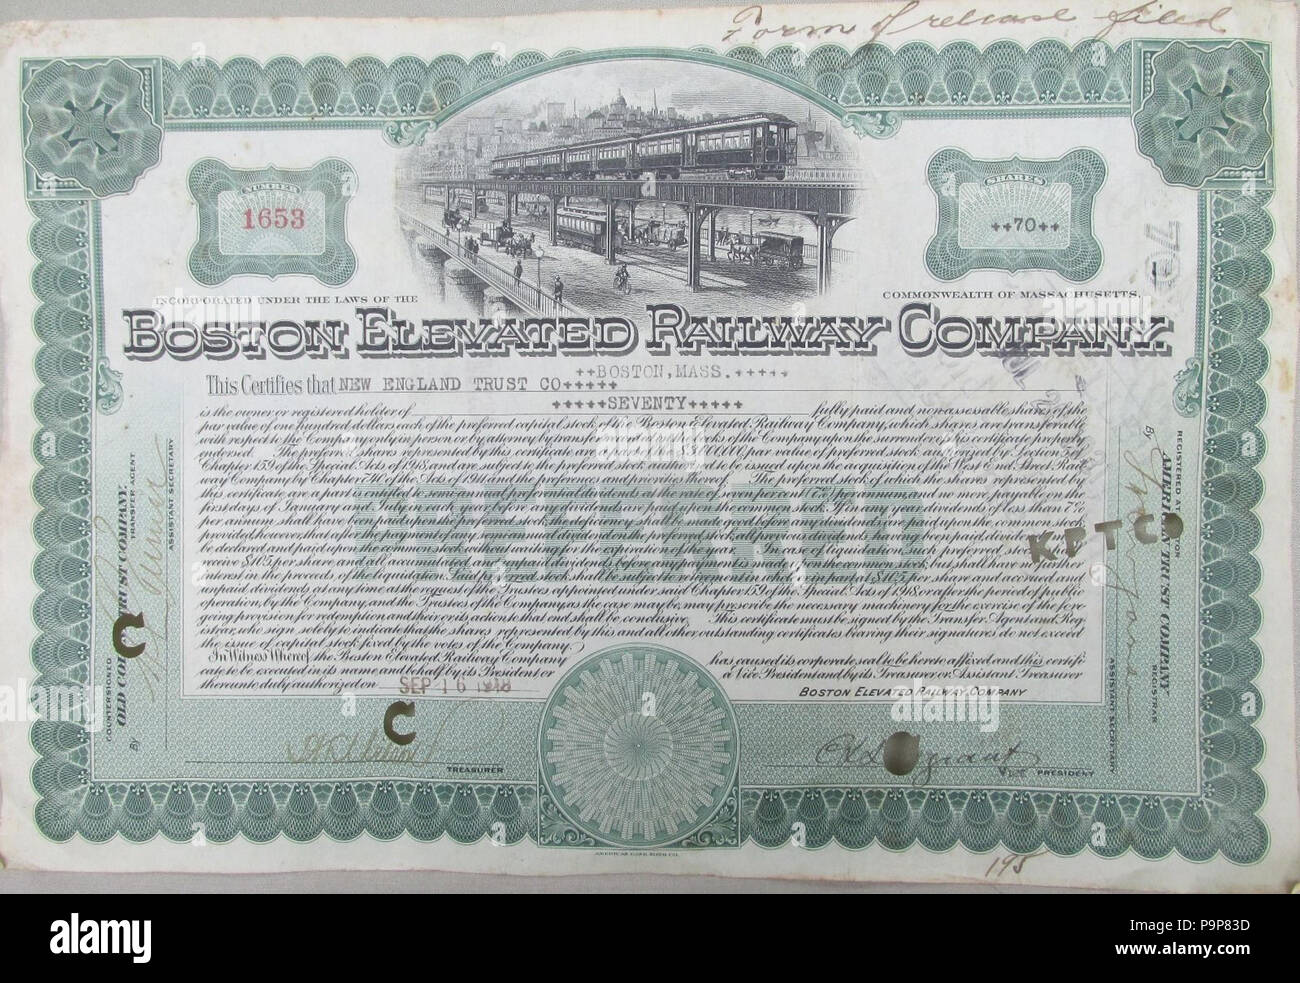 The Superintendent and Foreman Co > Massachusetts old stock certificate share 